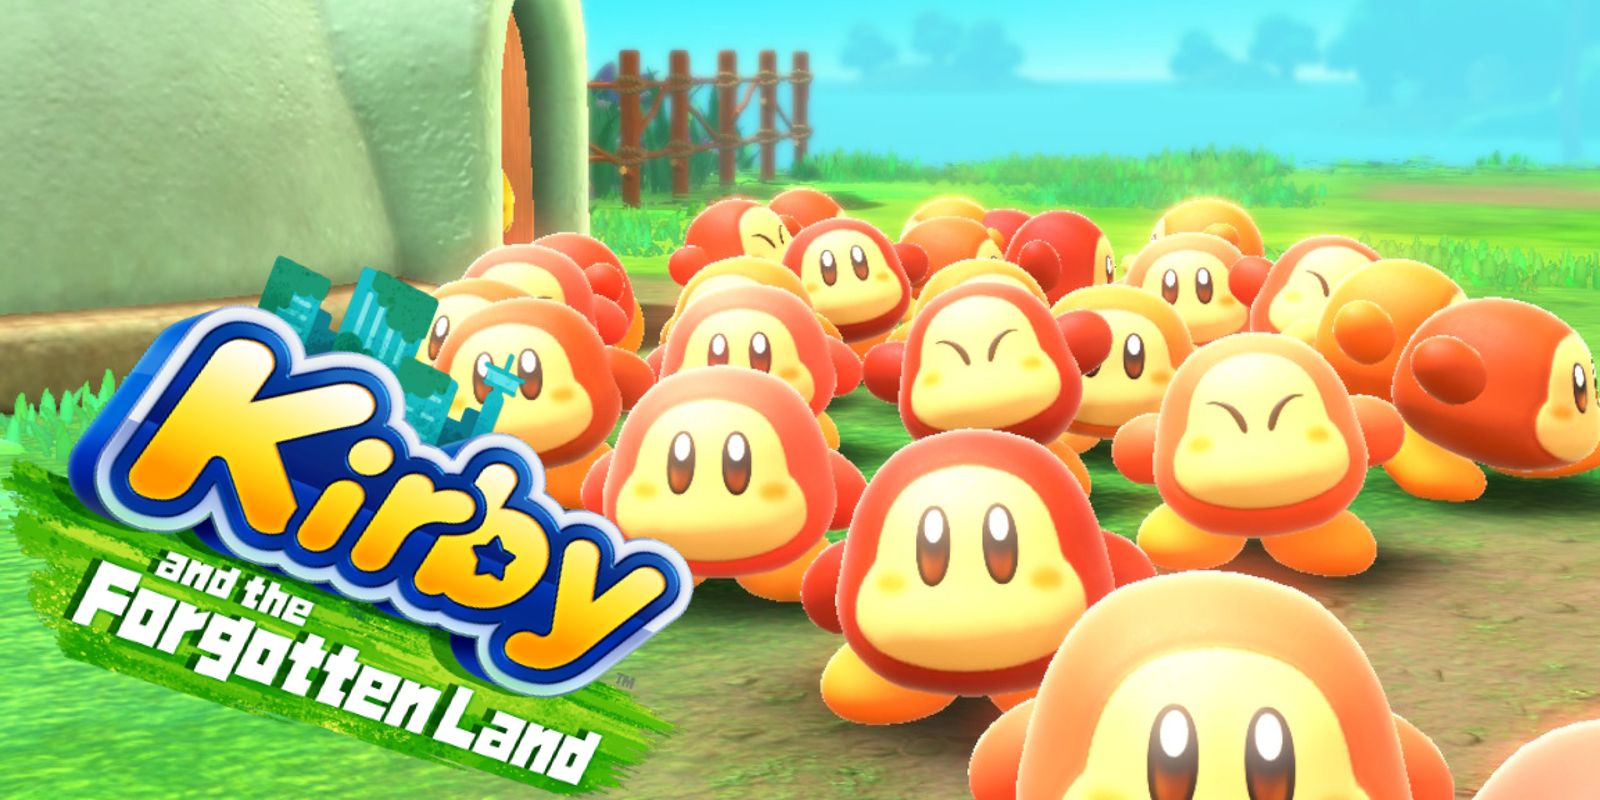 Kirby and the Forgotten Land screens and art with Waddle Dee and more